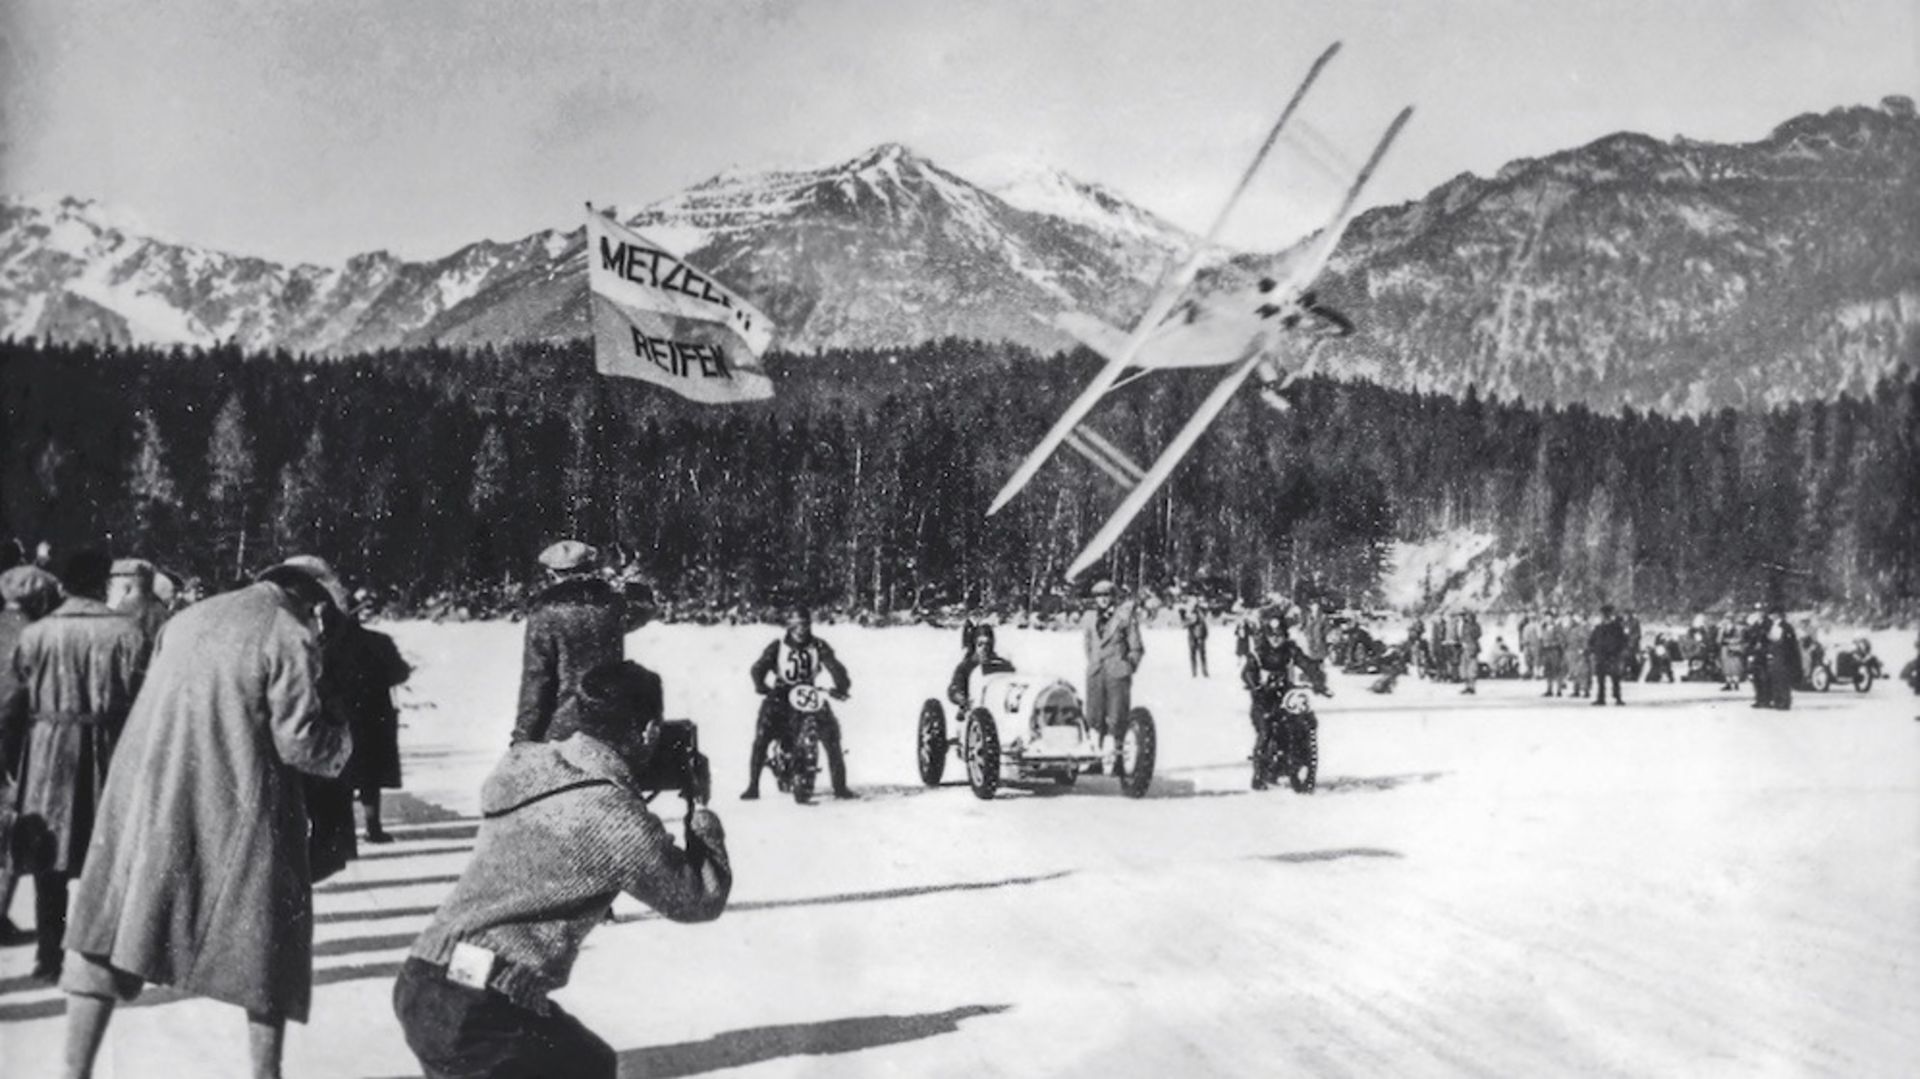 Archive of Zell am See ice races, biplane over track